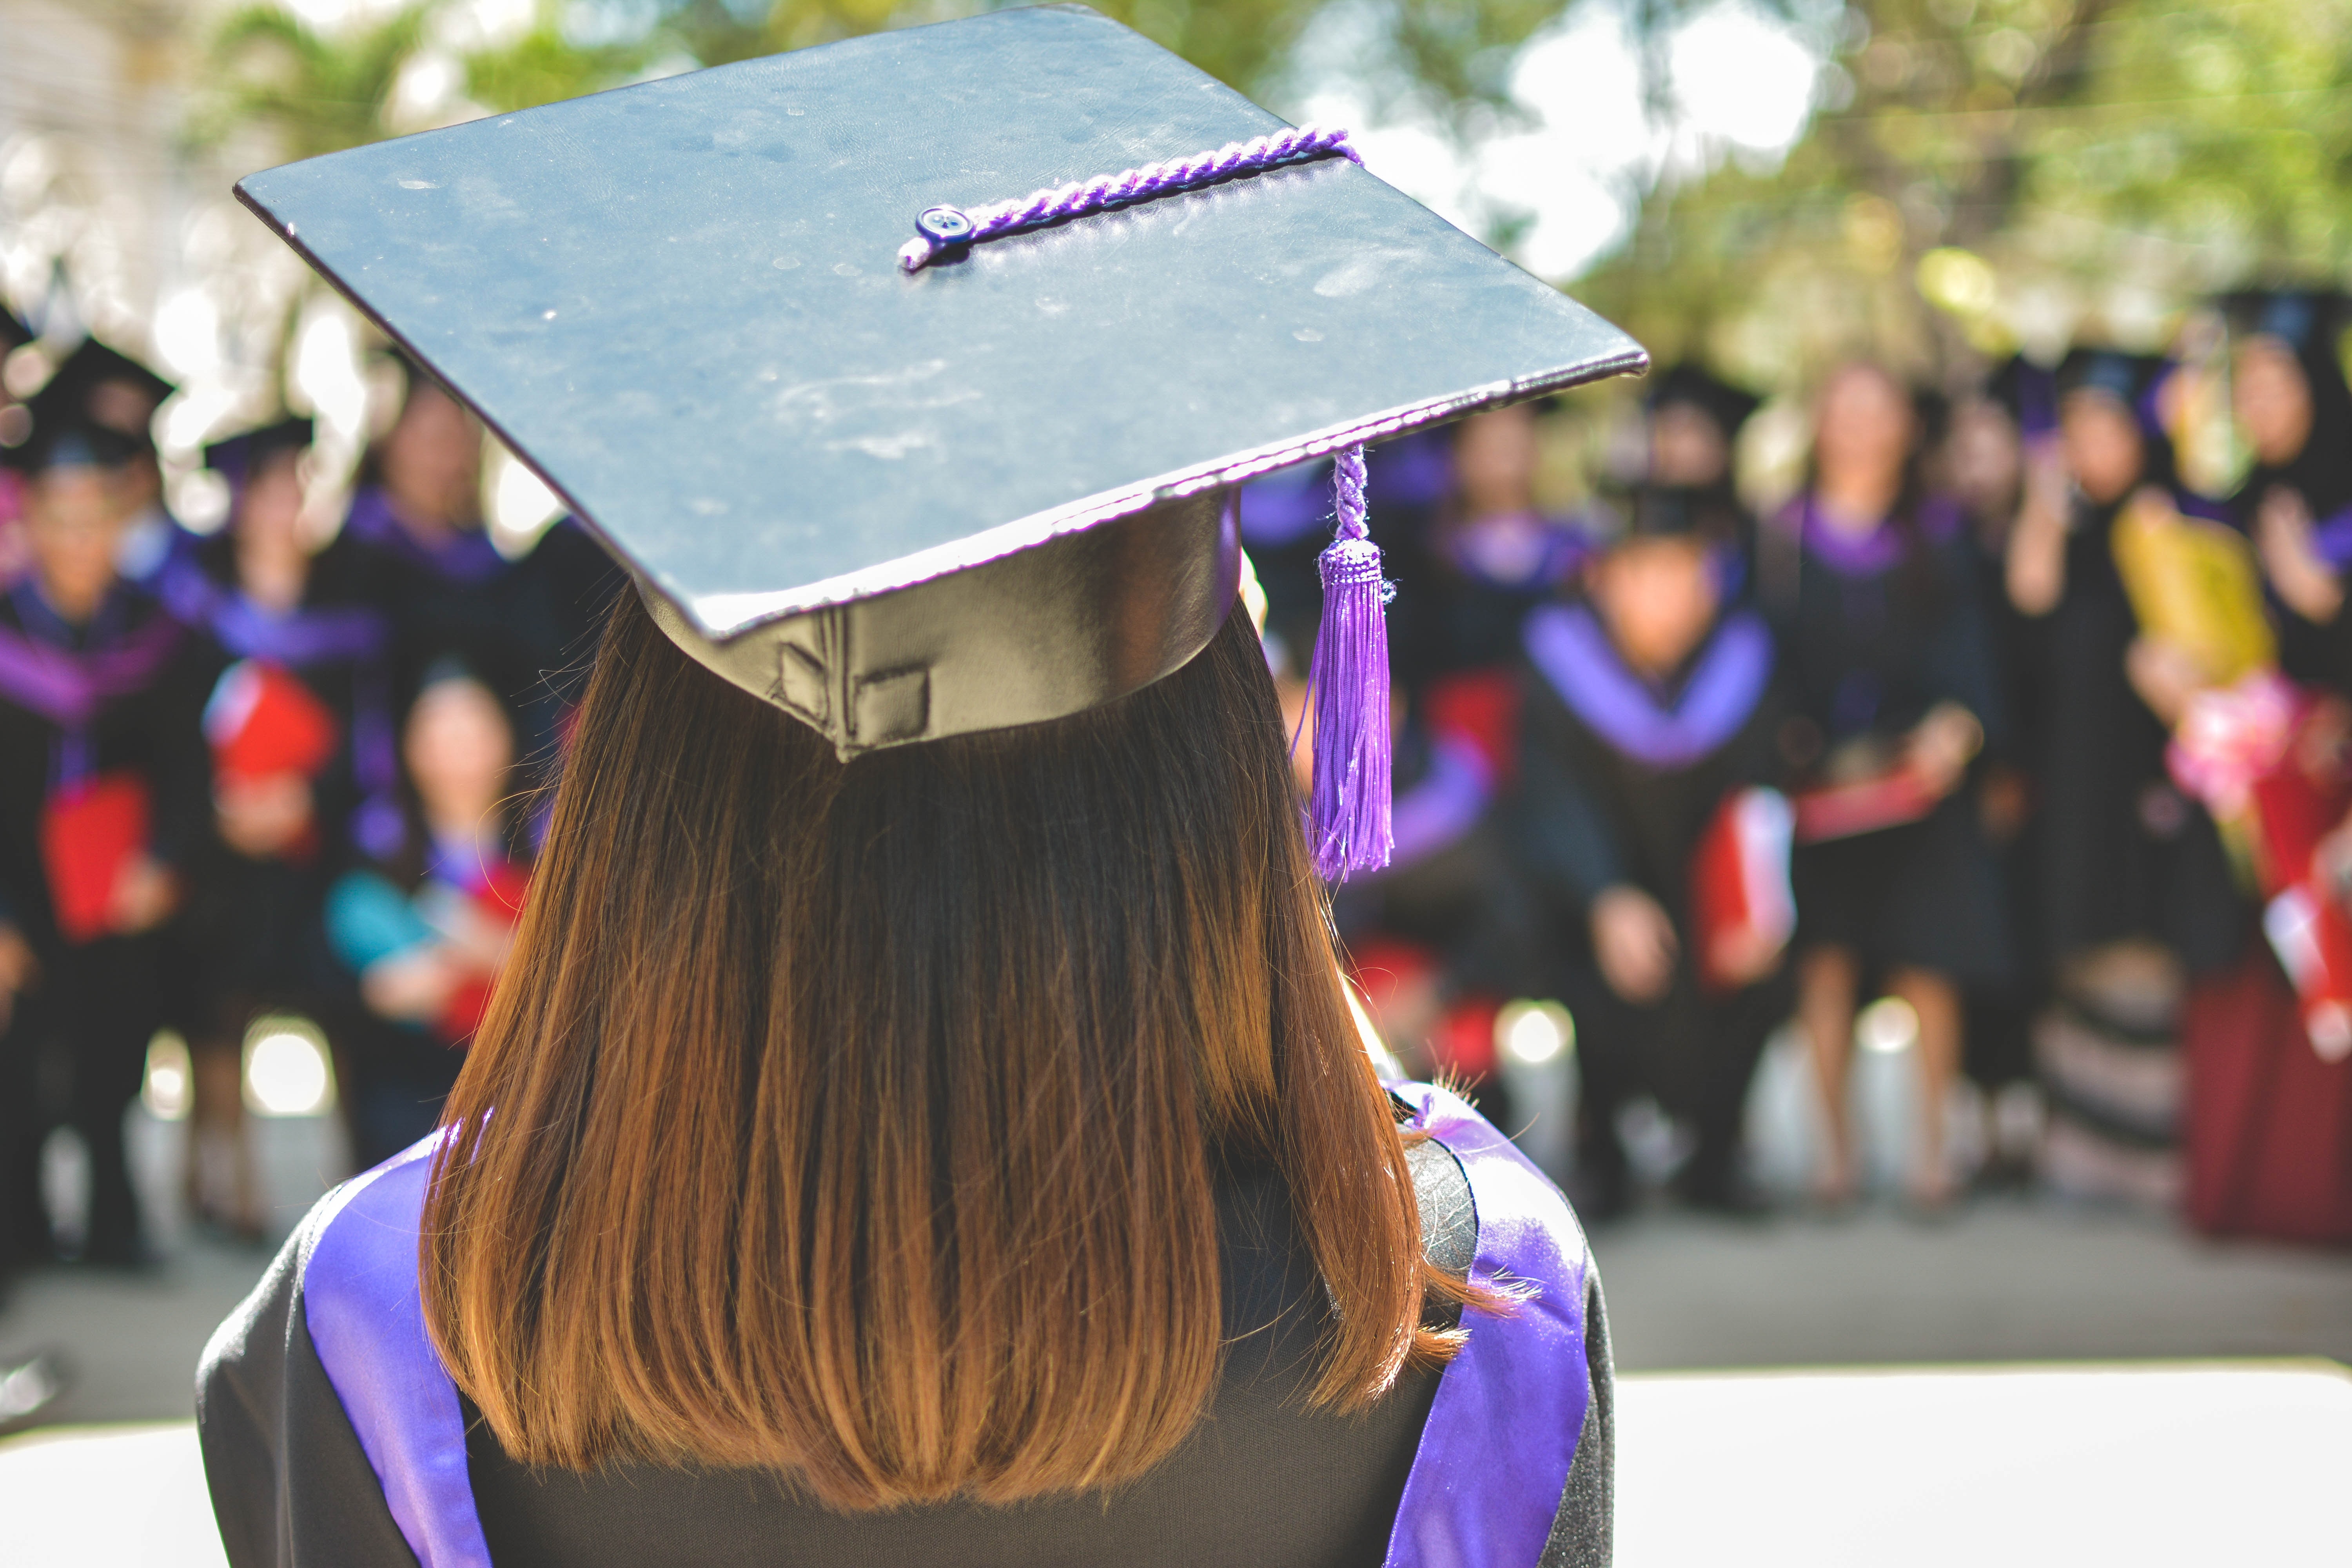 image of a person from behind wearing a graduation cam and gown